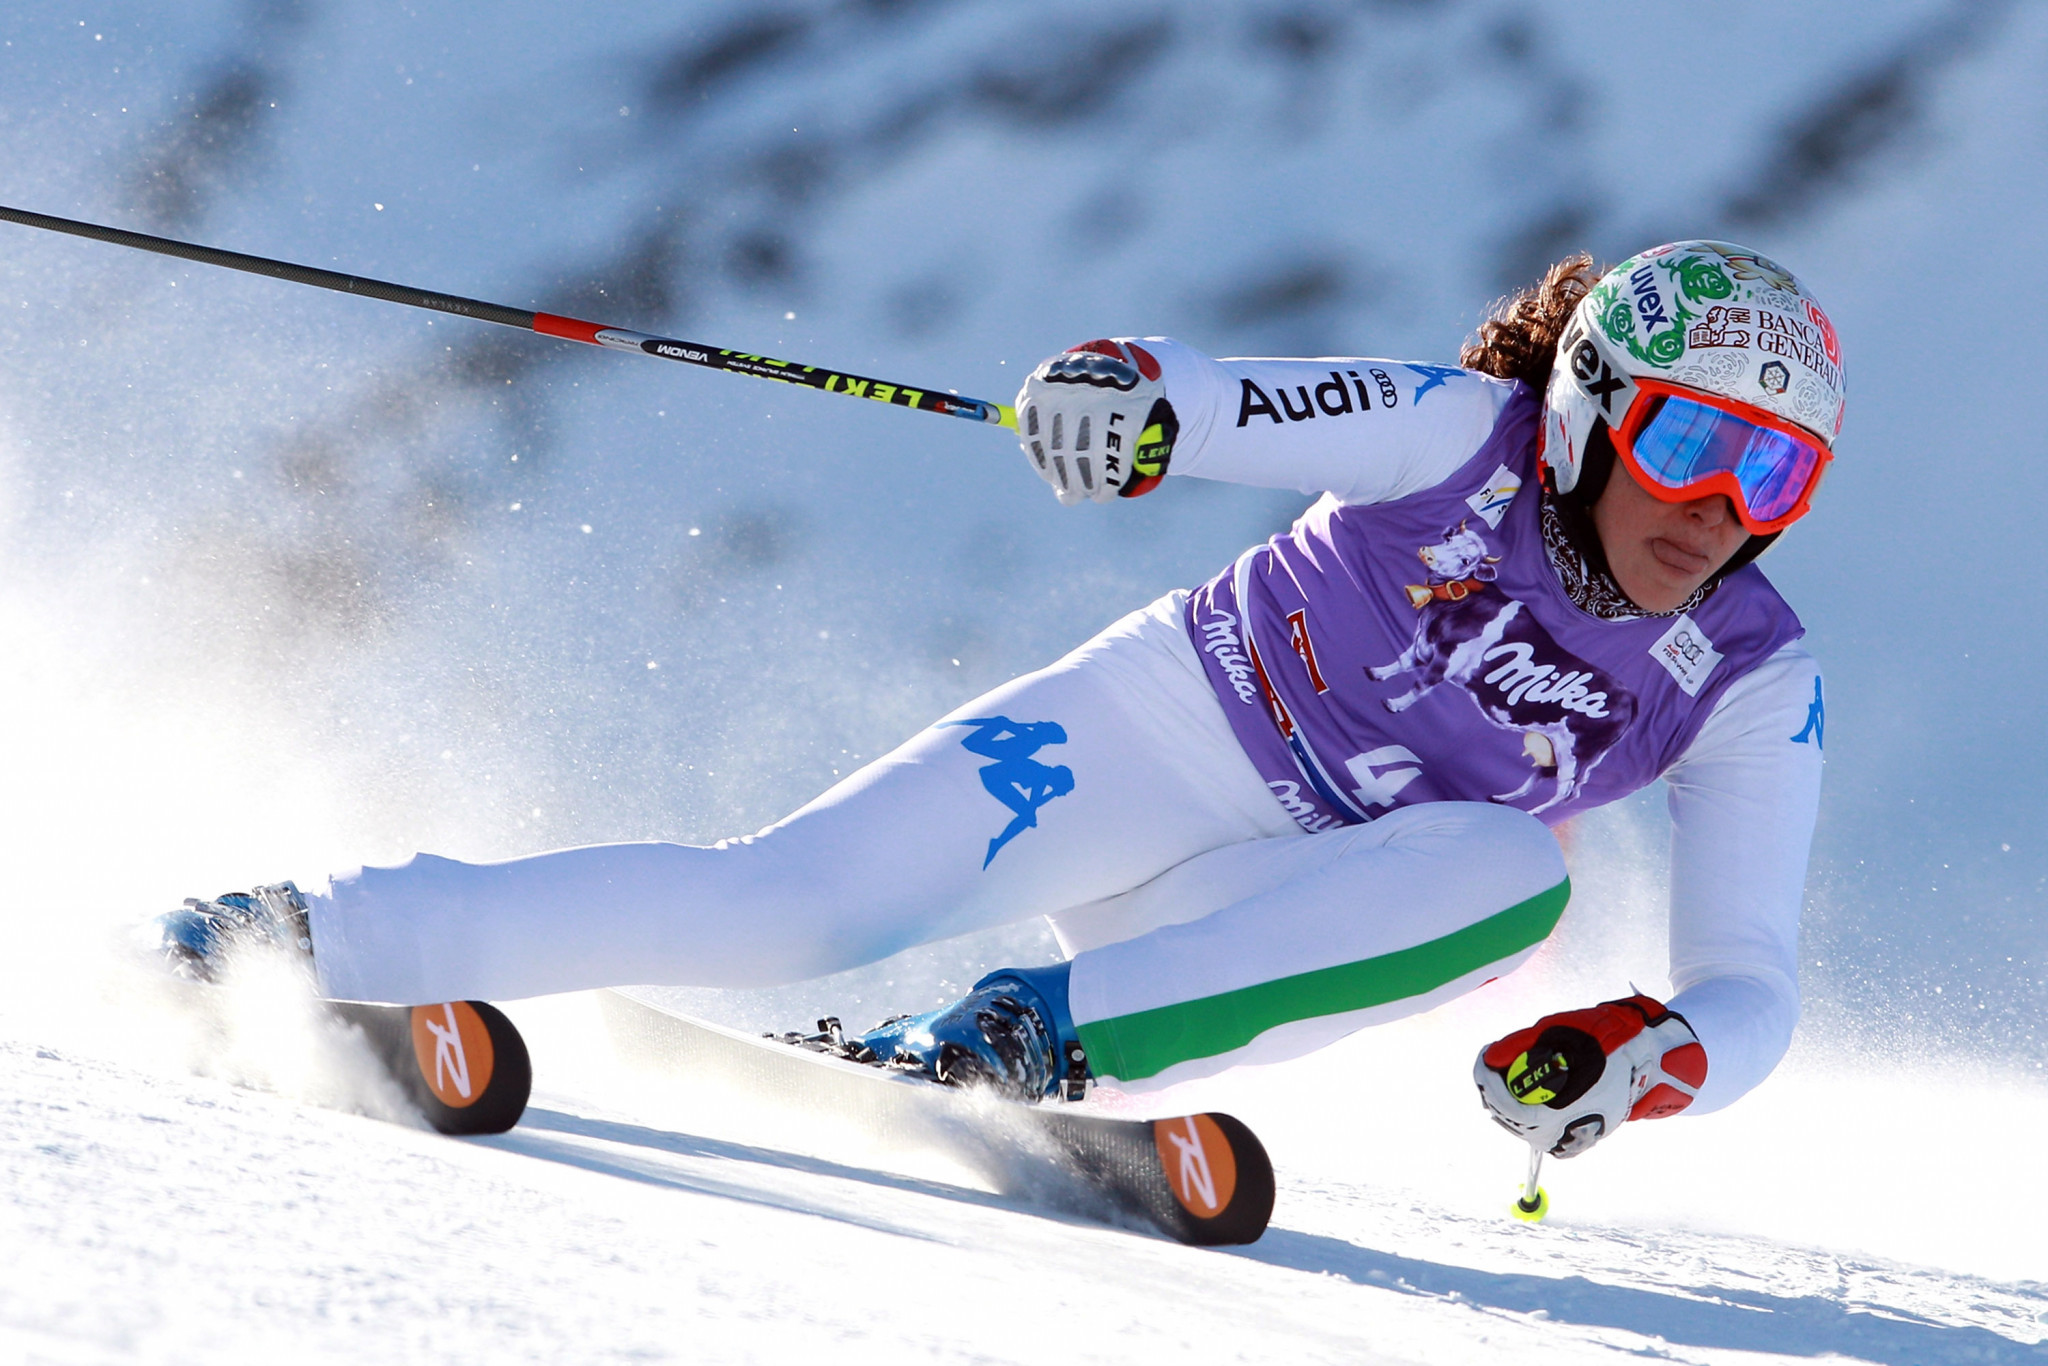 Federica Brignone has been in excellent form going into the World Cup event in Cortina d’Ampezzo ©Getty Images